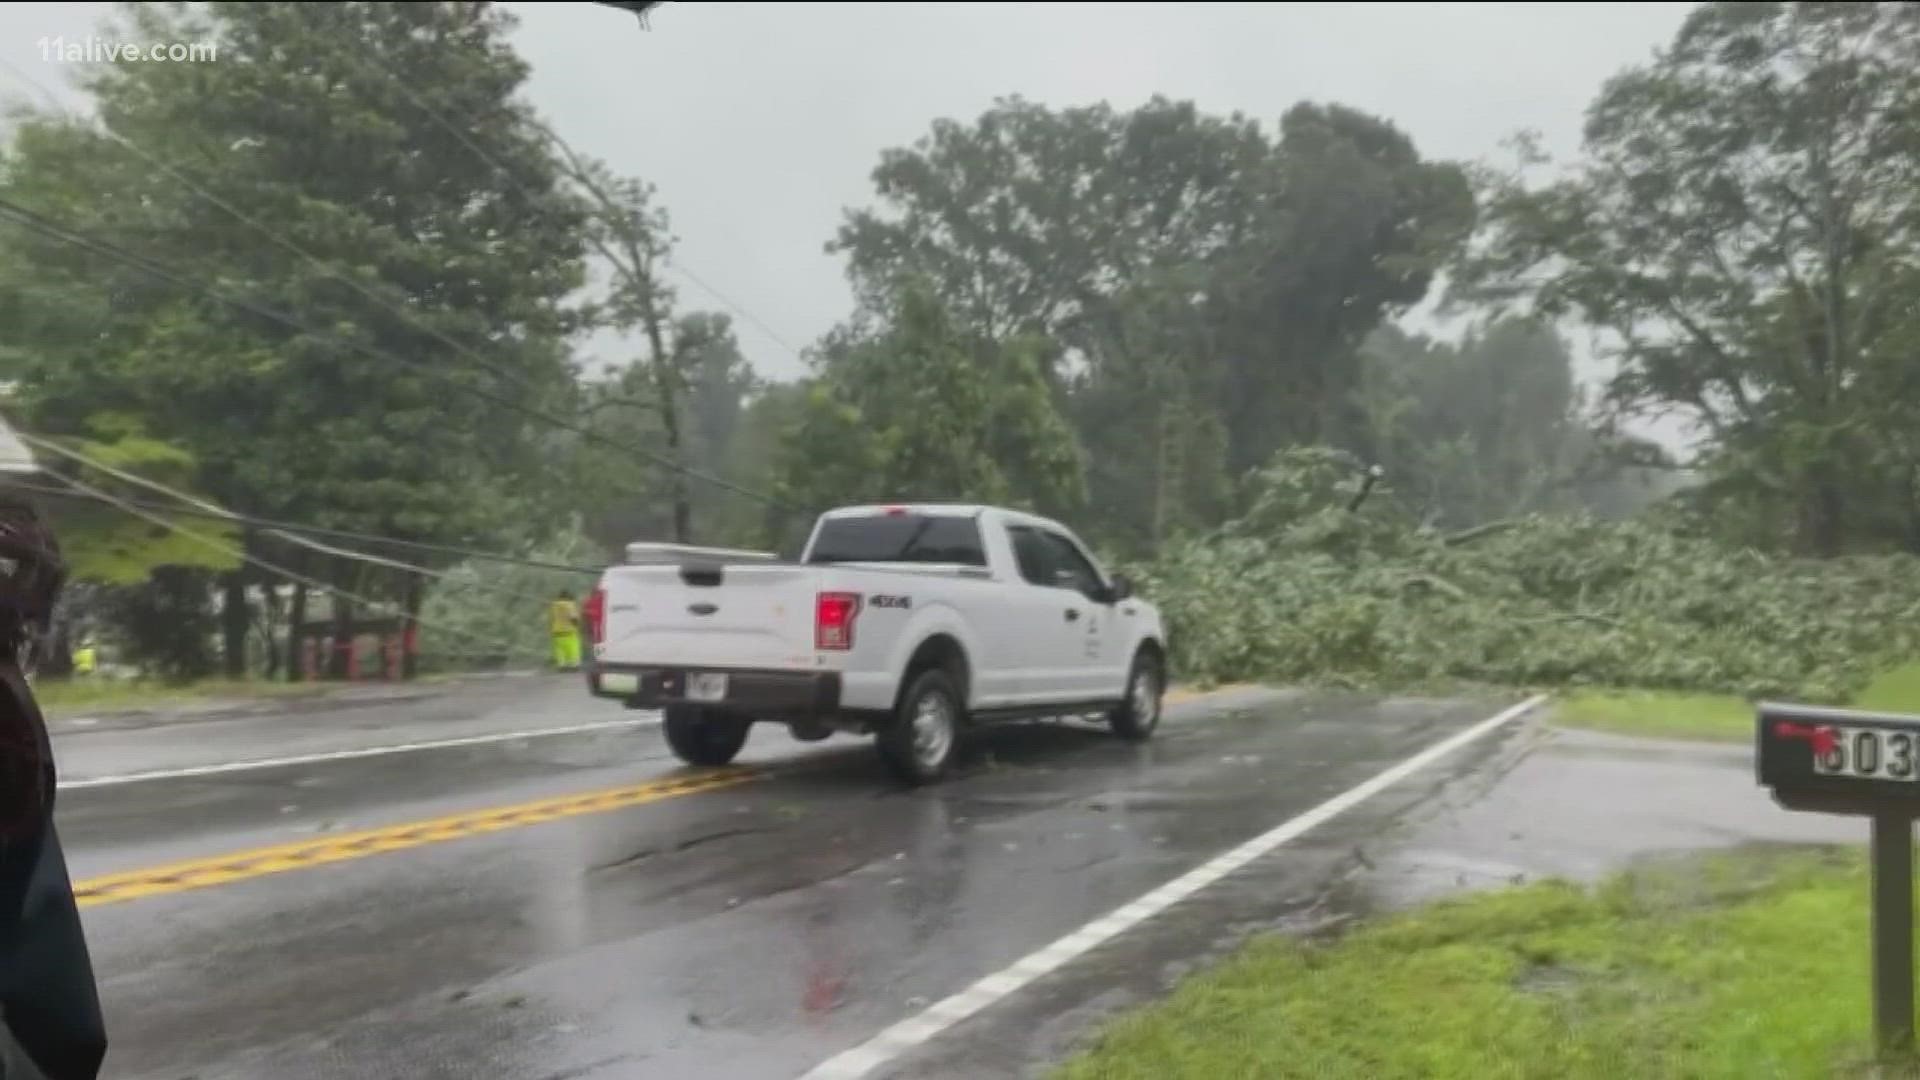 Tropical Depression Fred is leaving damage across the area, including trees down and power outages.